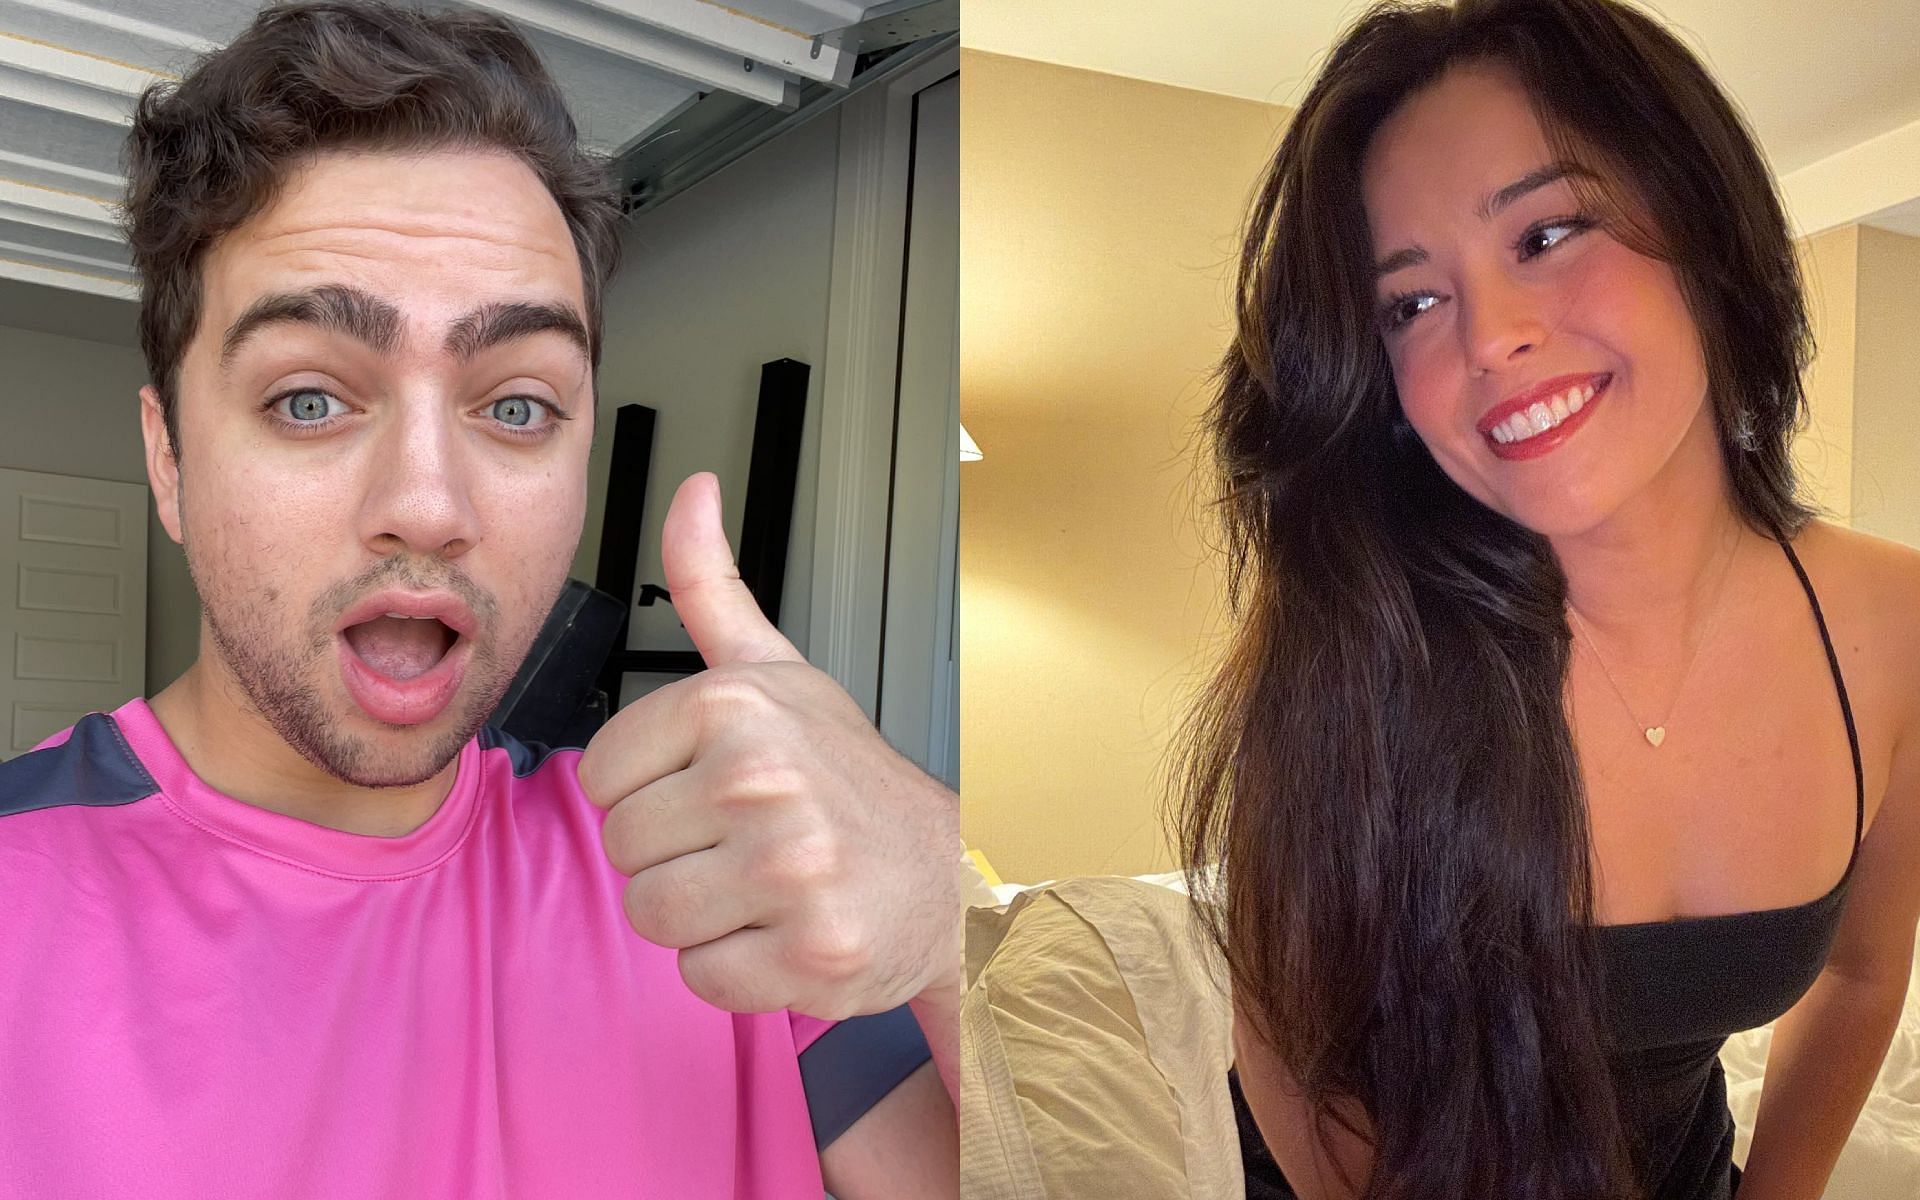 Mizkif gets embarrassed after reviewing his year-old behavior during the collaboration with Valkyrae (Images via Mizkif and Valkyrae/Twitter)